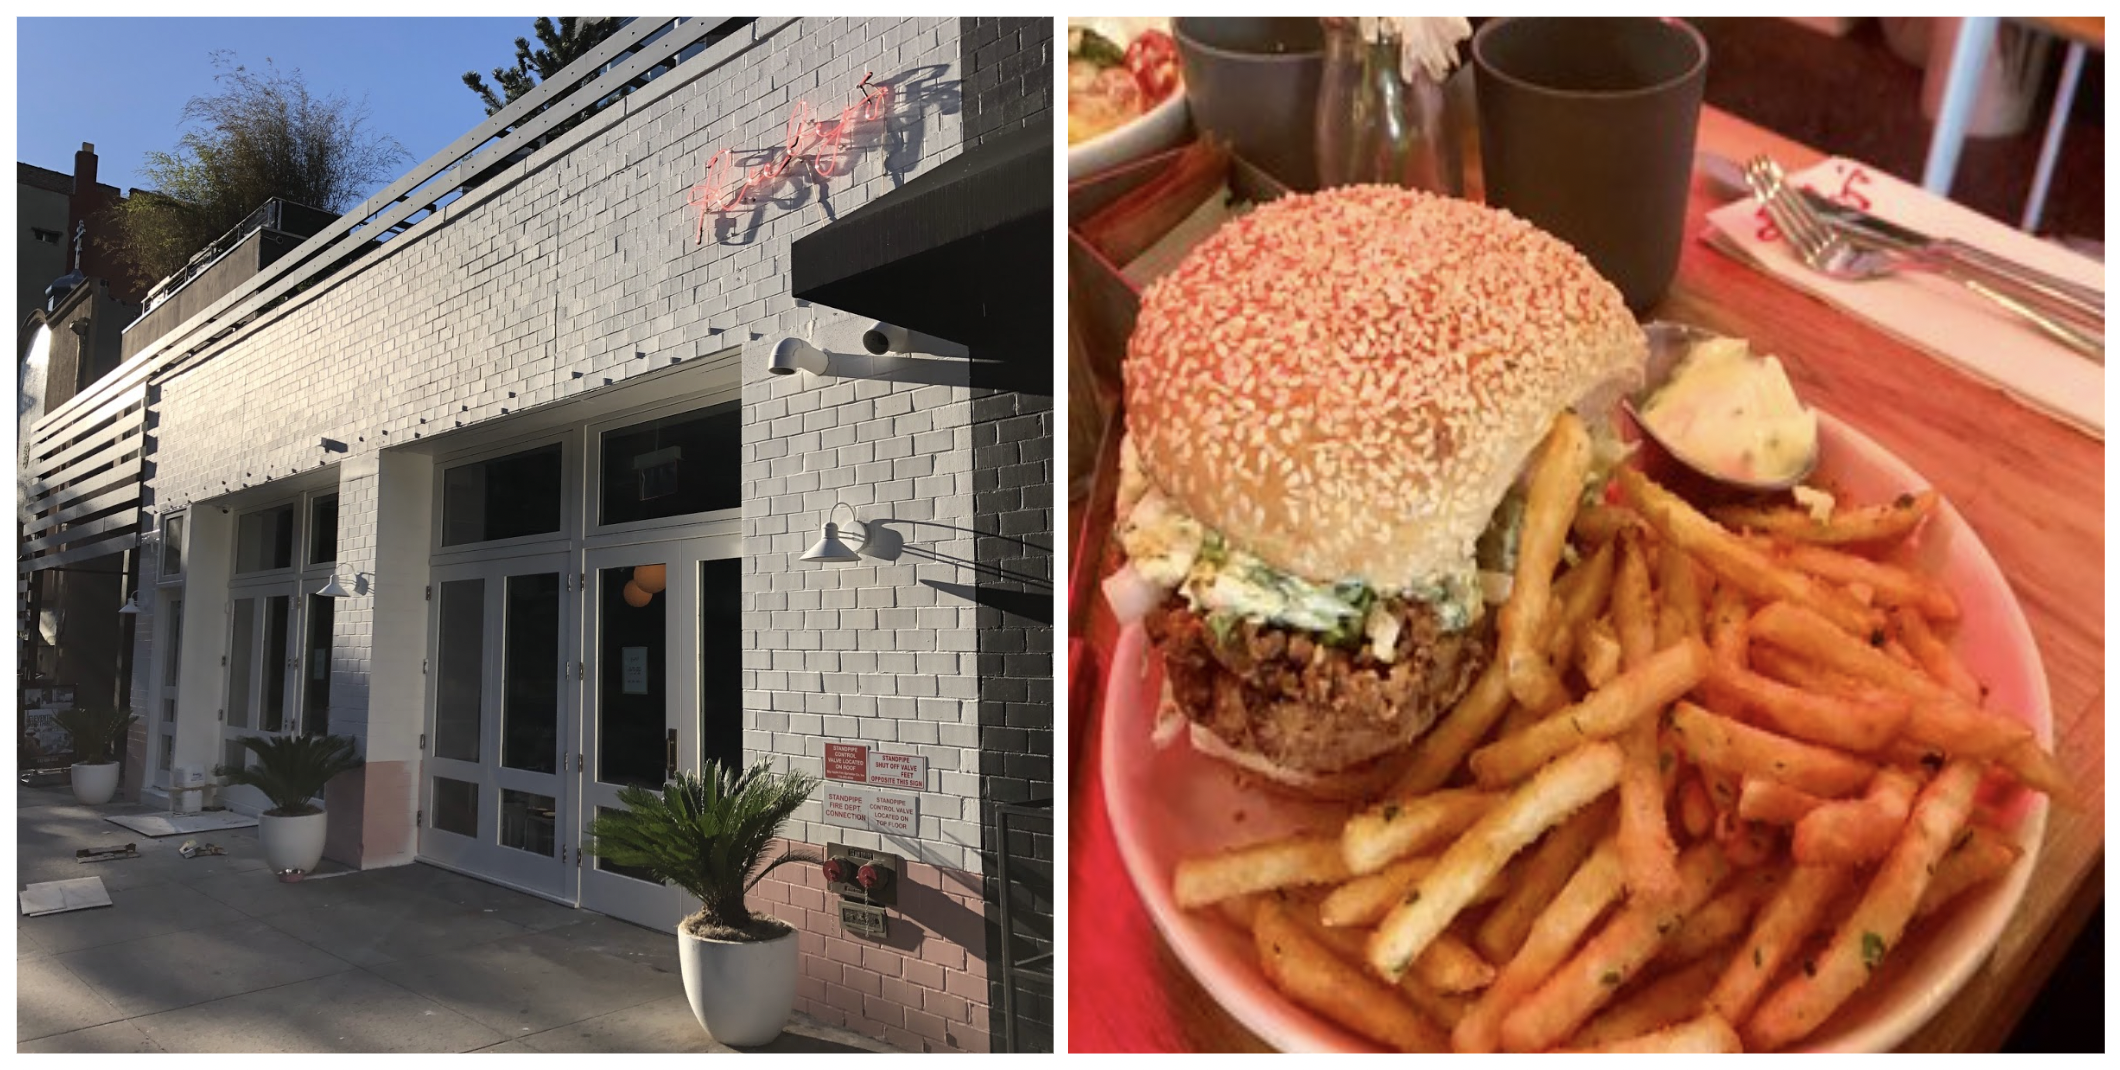 Exterior view of Ruby's along with plate of a hamburger and crispy fries.